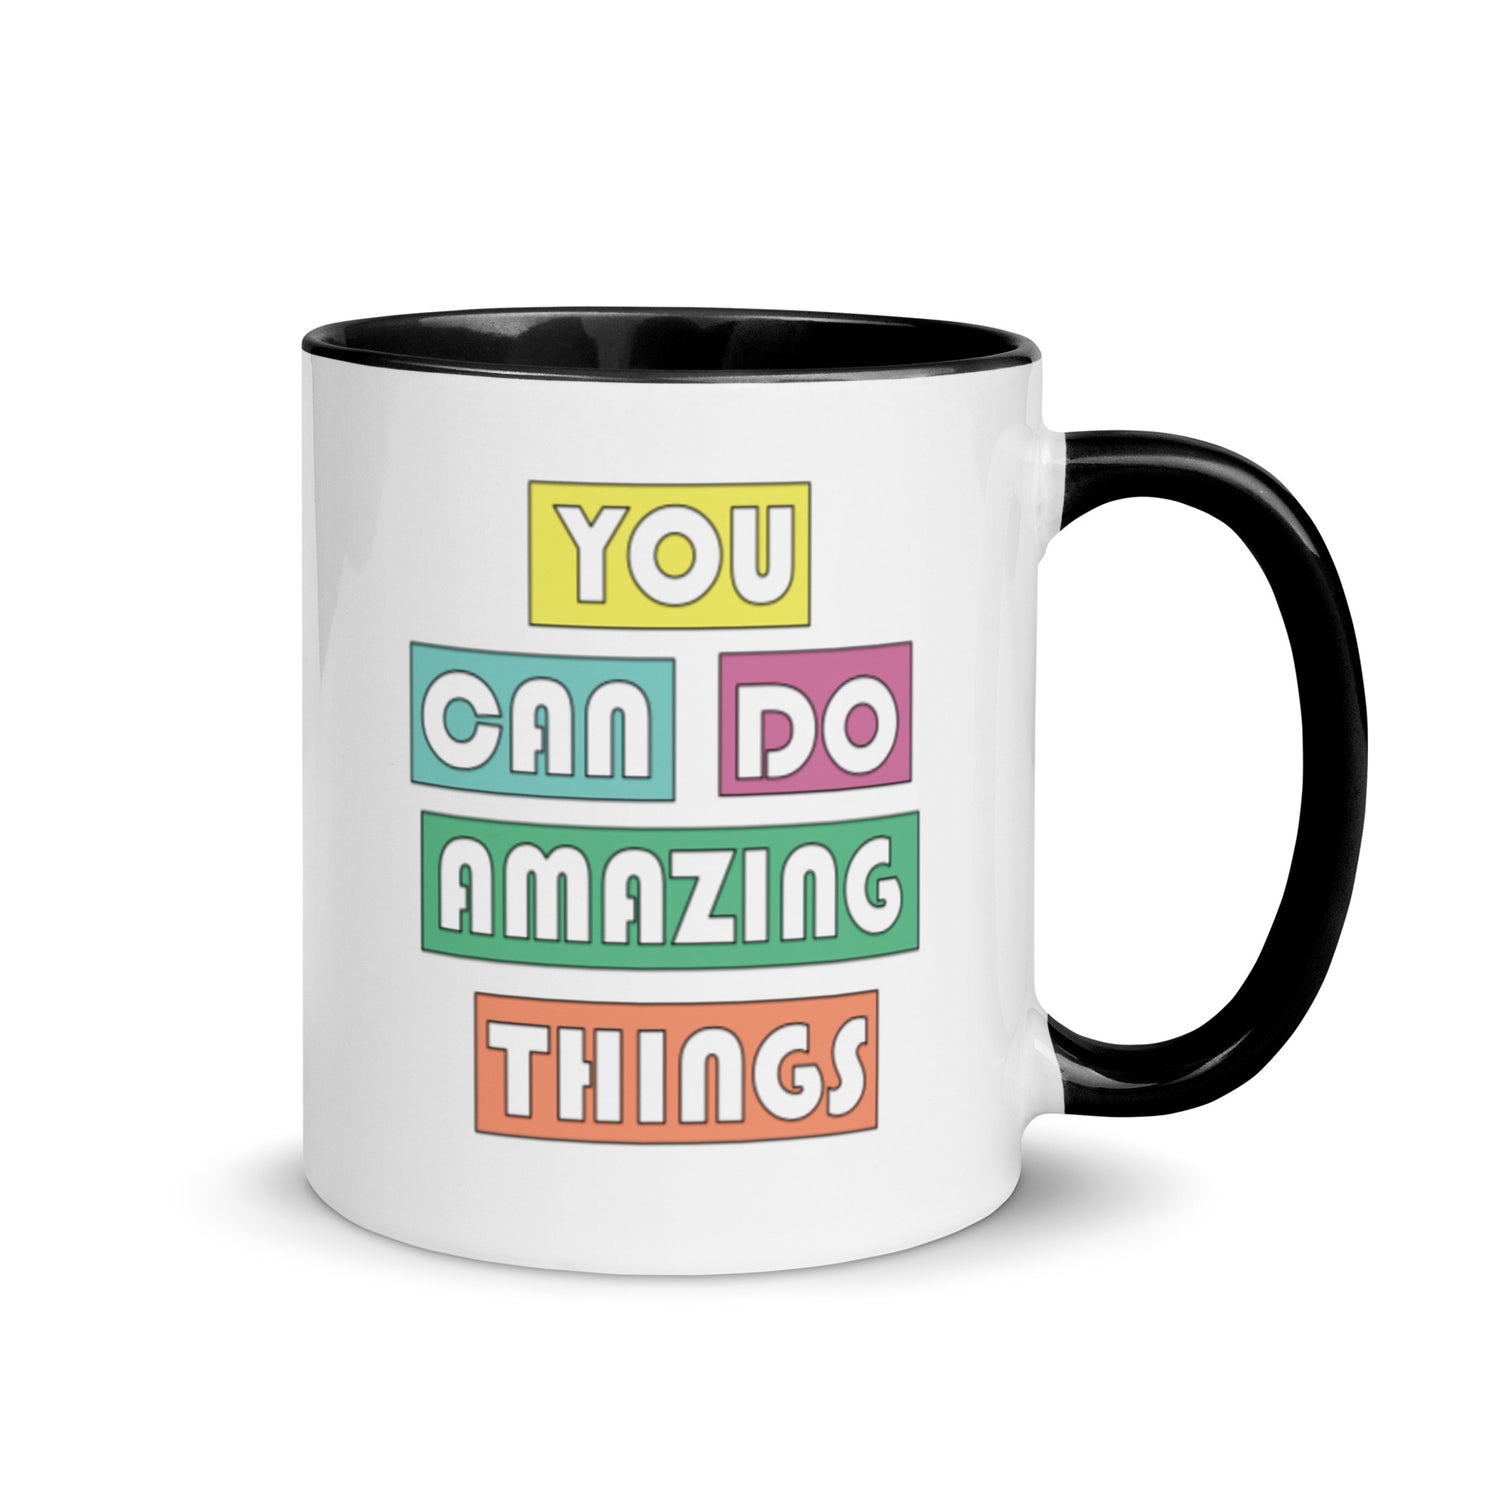 you can do amazing things mug with black interior